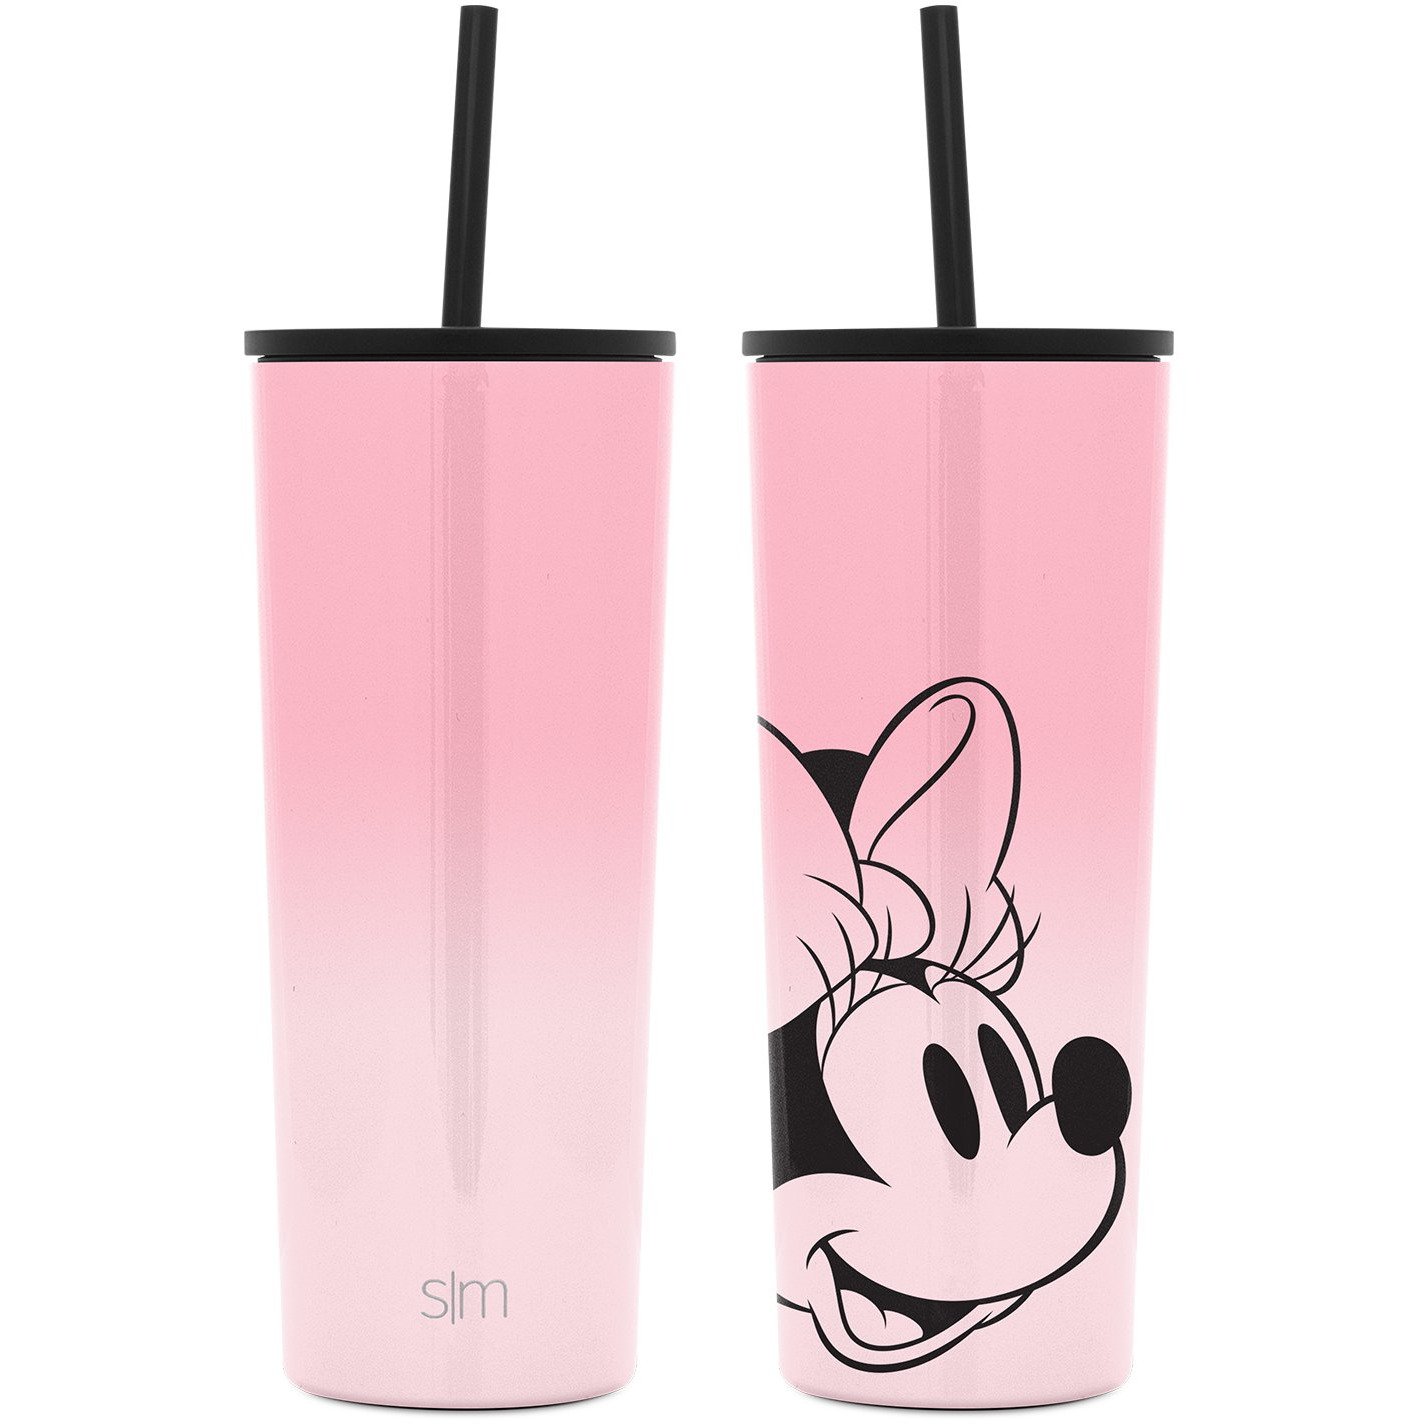 https://mickeyblog.com/wp-content/uploads/2020/09/classic-24oz-minnie-mouse.jpg